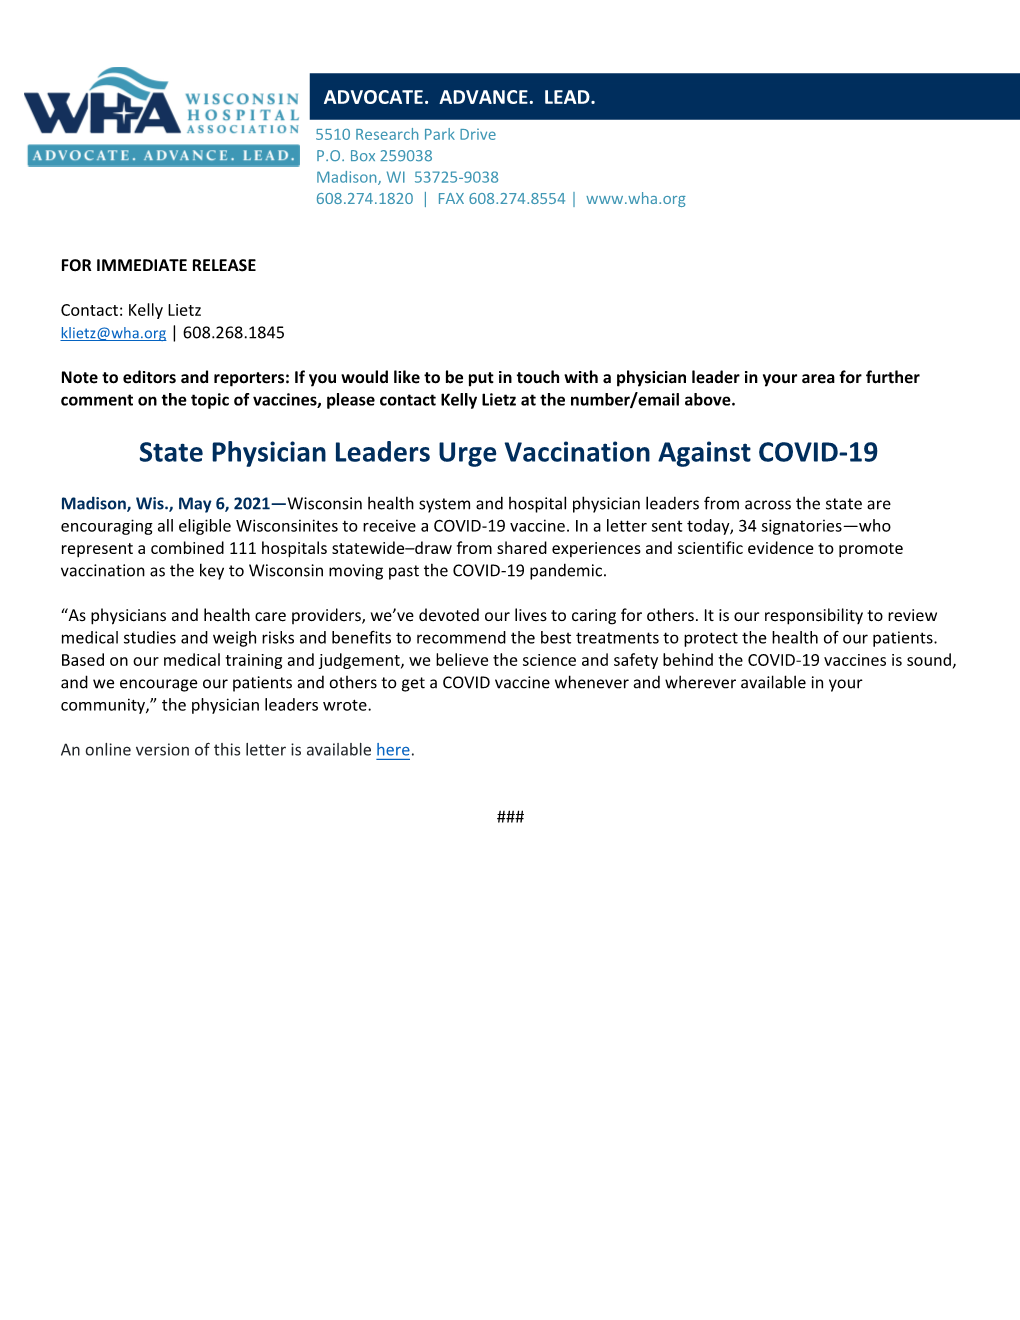 State Physician Leaders Urge Vaccination Against COVID-19